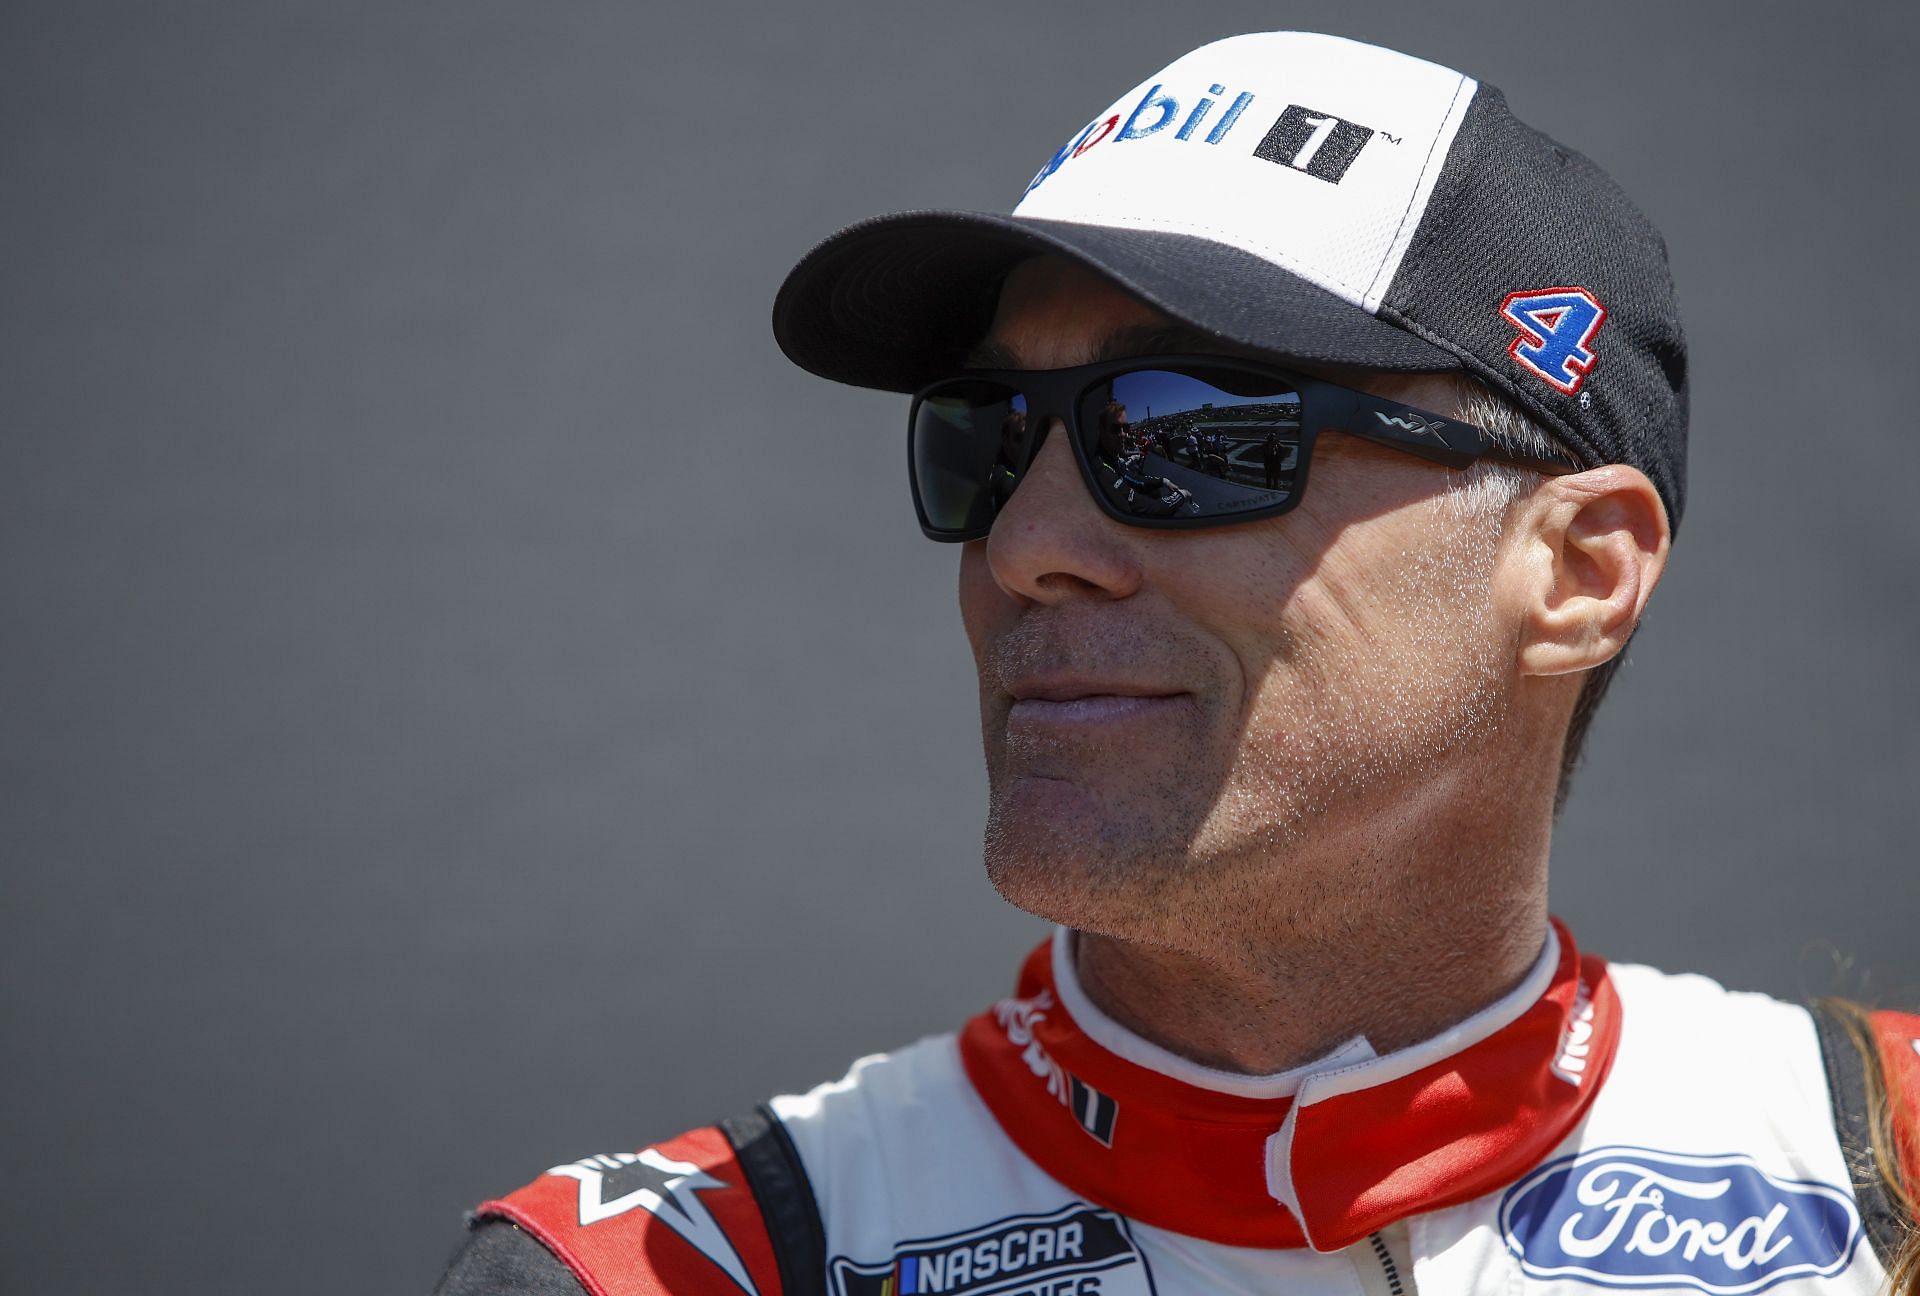 Kevin Harvick waits backstage during driver intros prior to the NASCAR Cup Series Folds of Honor QuikTrip 500 at Atlanta Motor Speedway